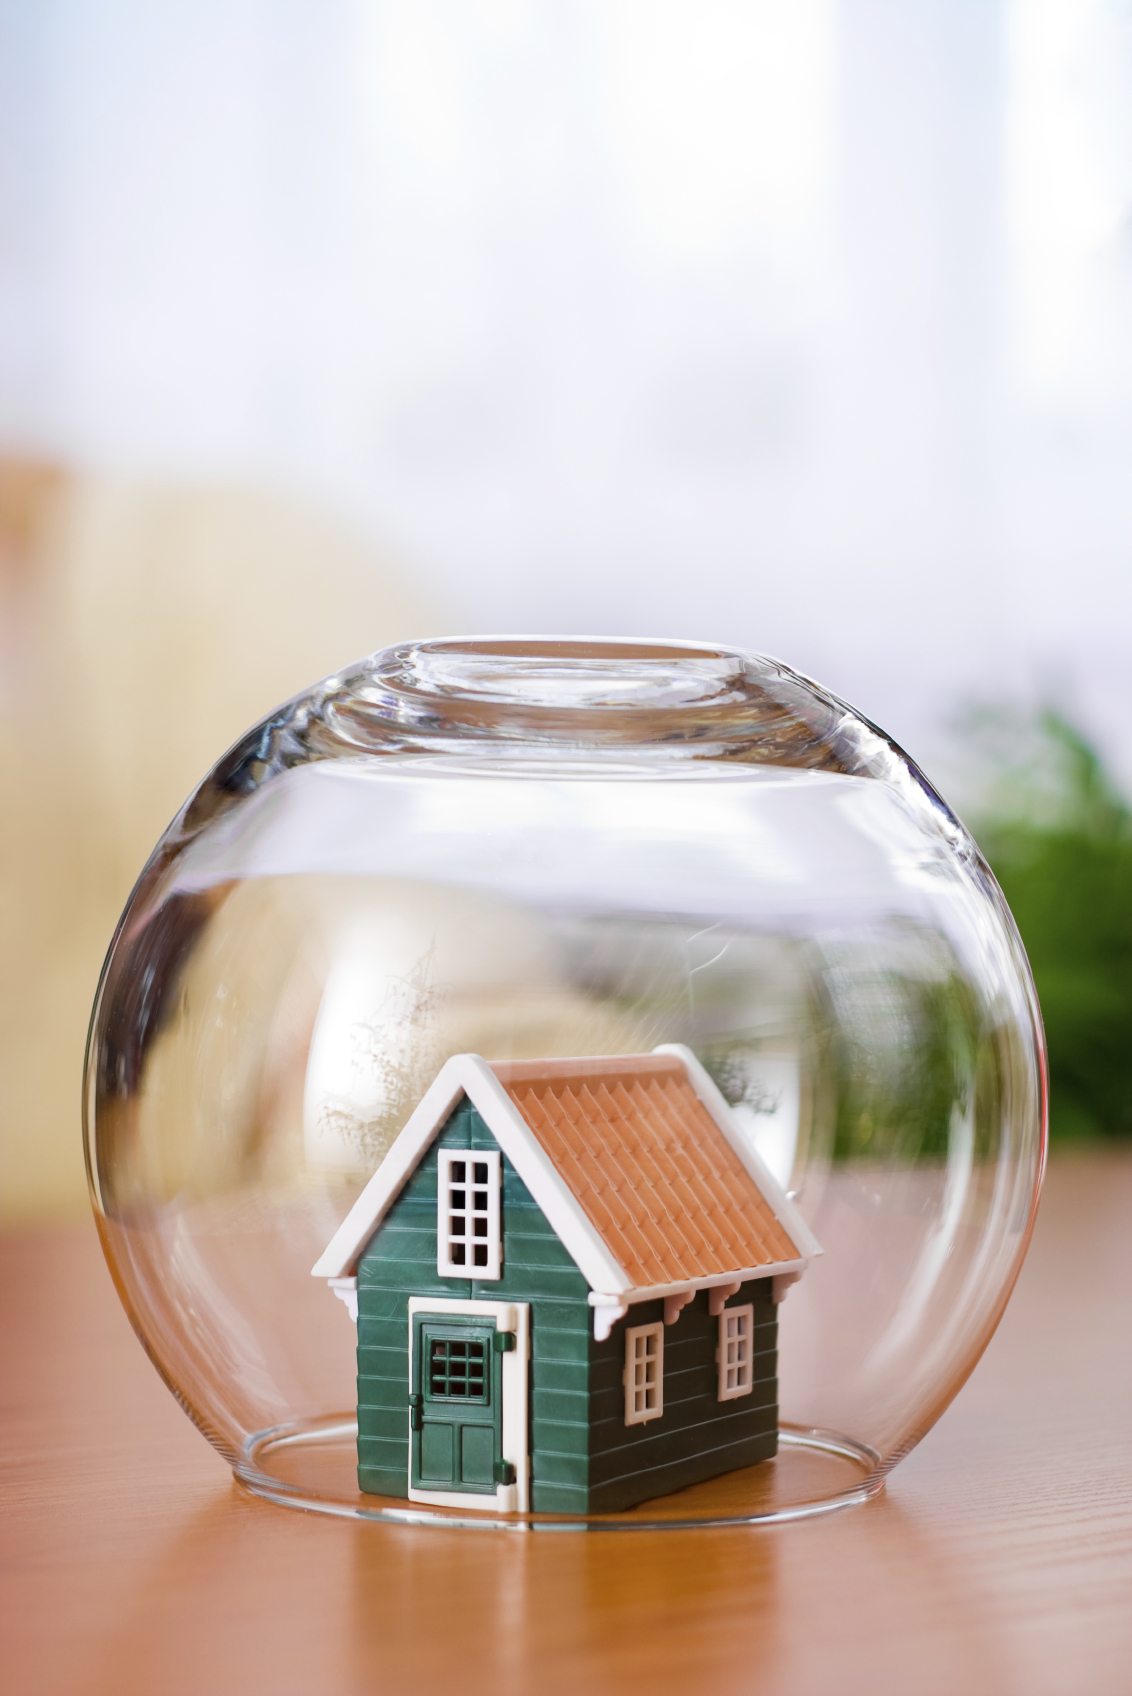 House in a bubble